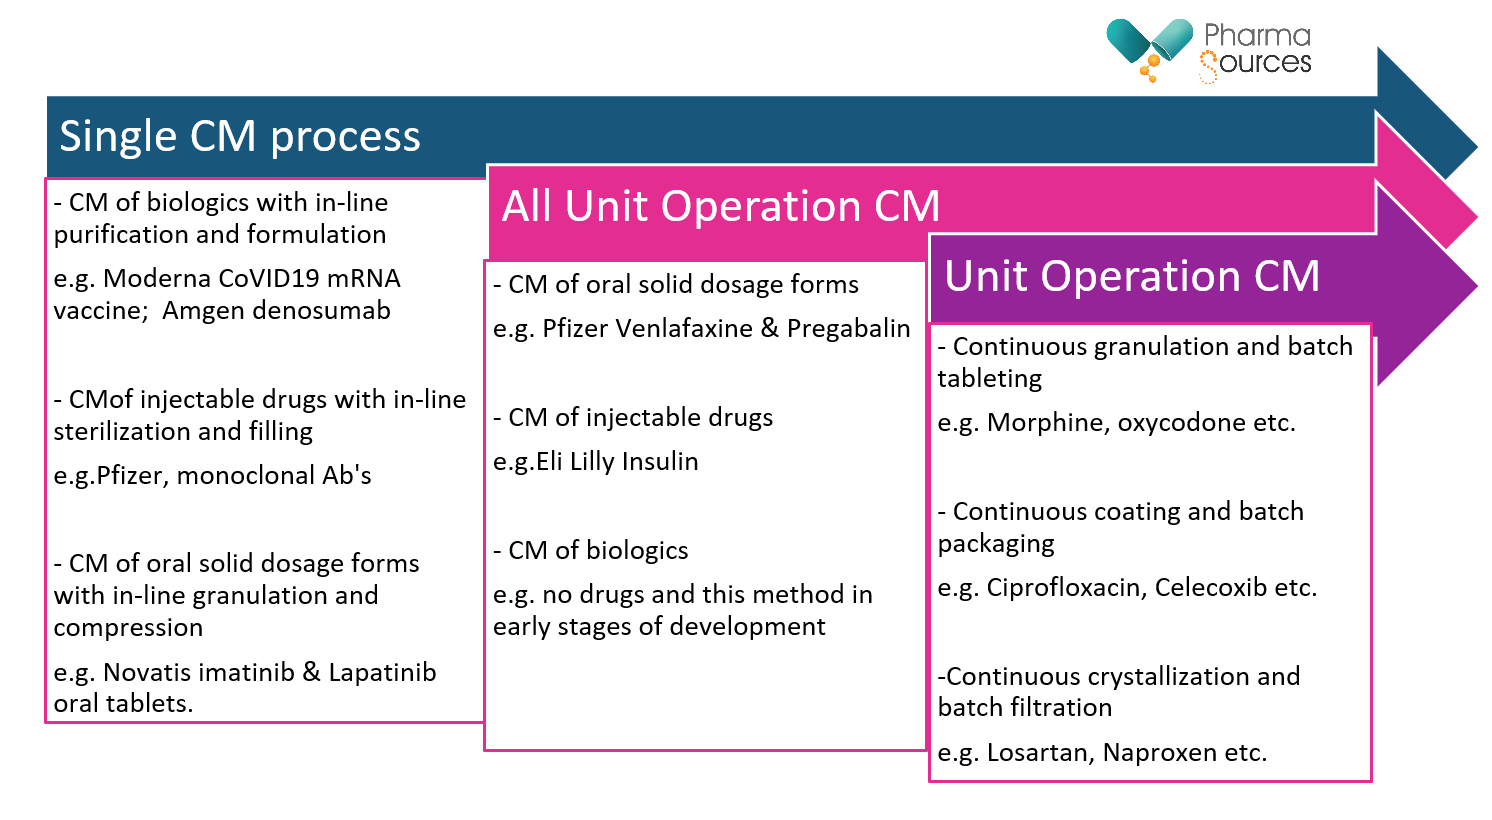 Figure above is showing the three mode of CM as per the ICH Q13 guidelines including different processes with examples of the products that are been manufactured.